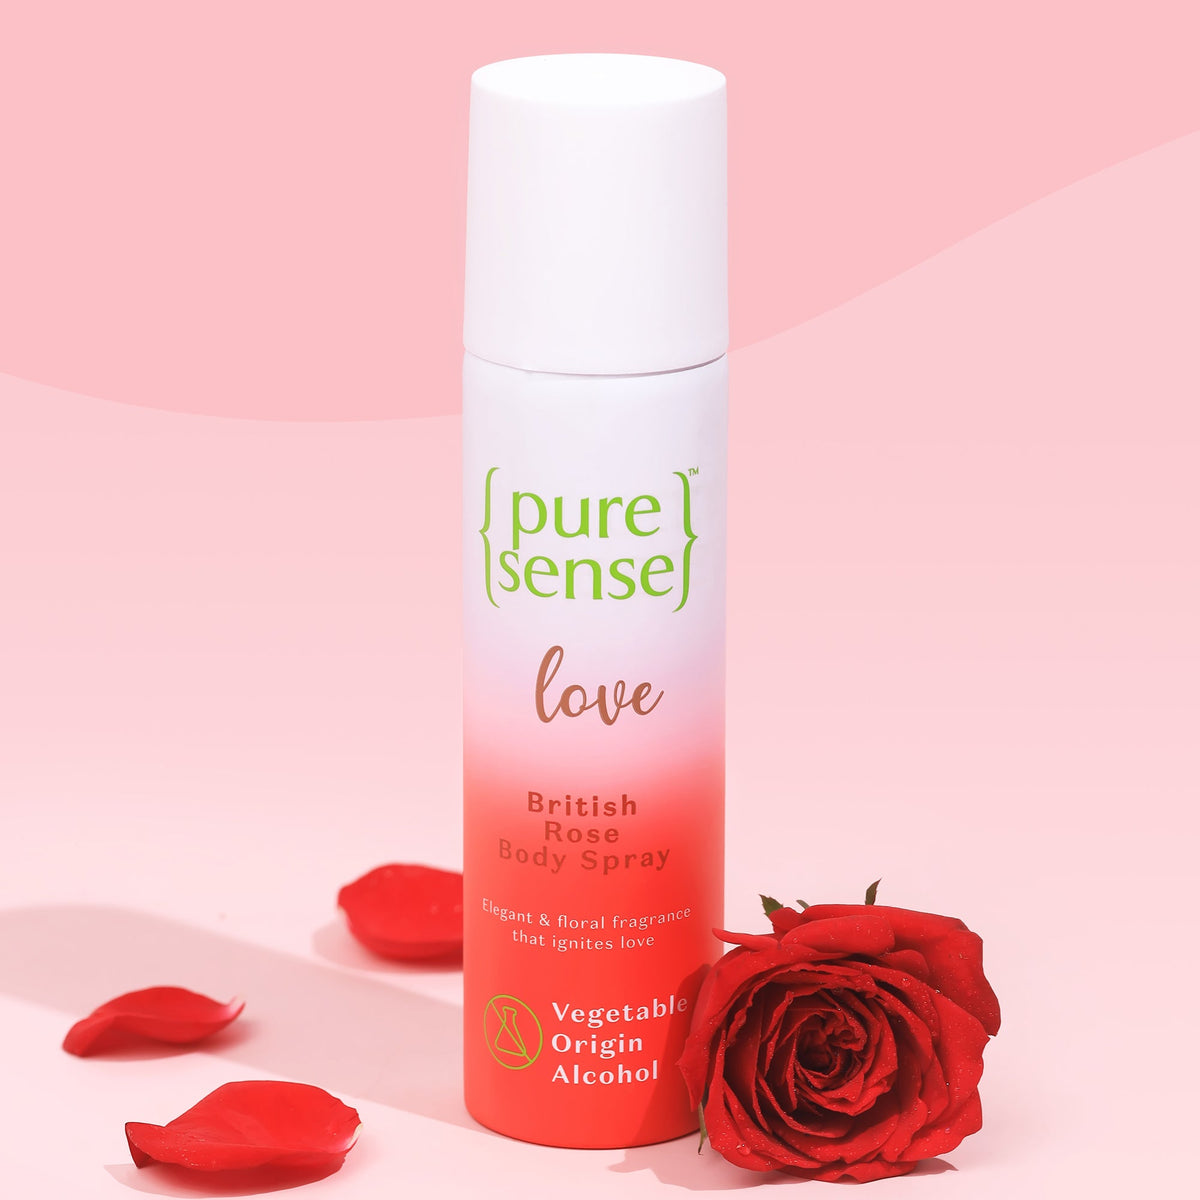 [JIO] Love British Rose Body Spray | From the makers of Parachute Advansed | 150ml